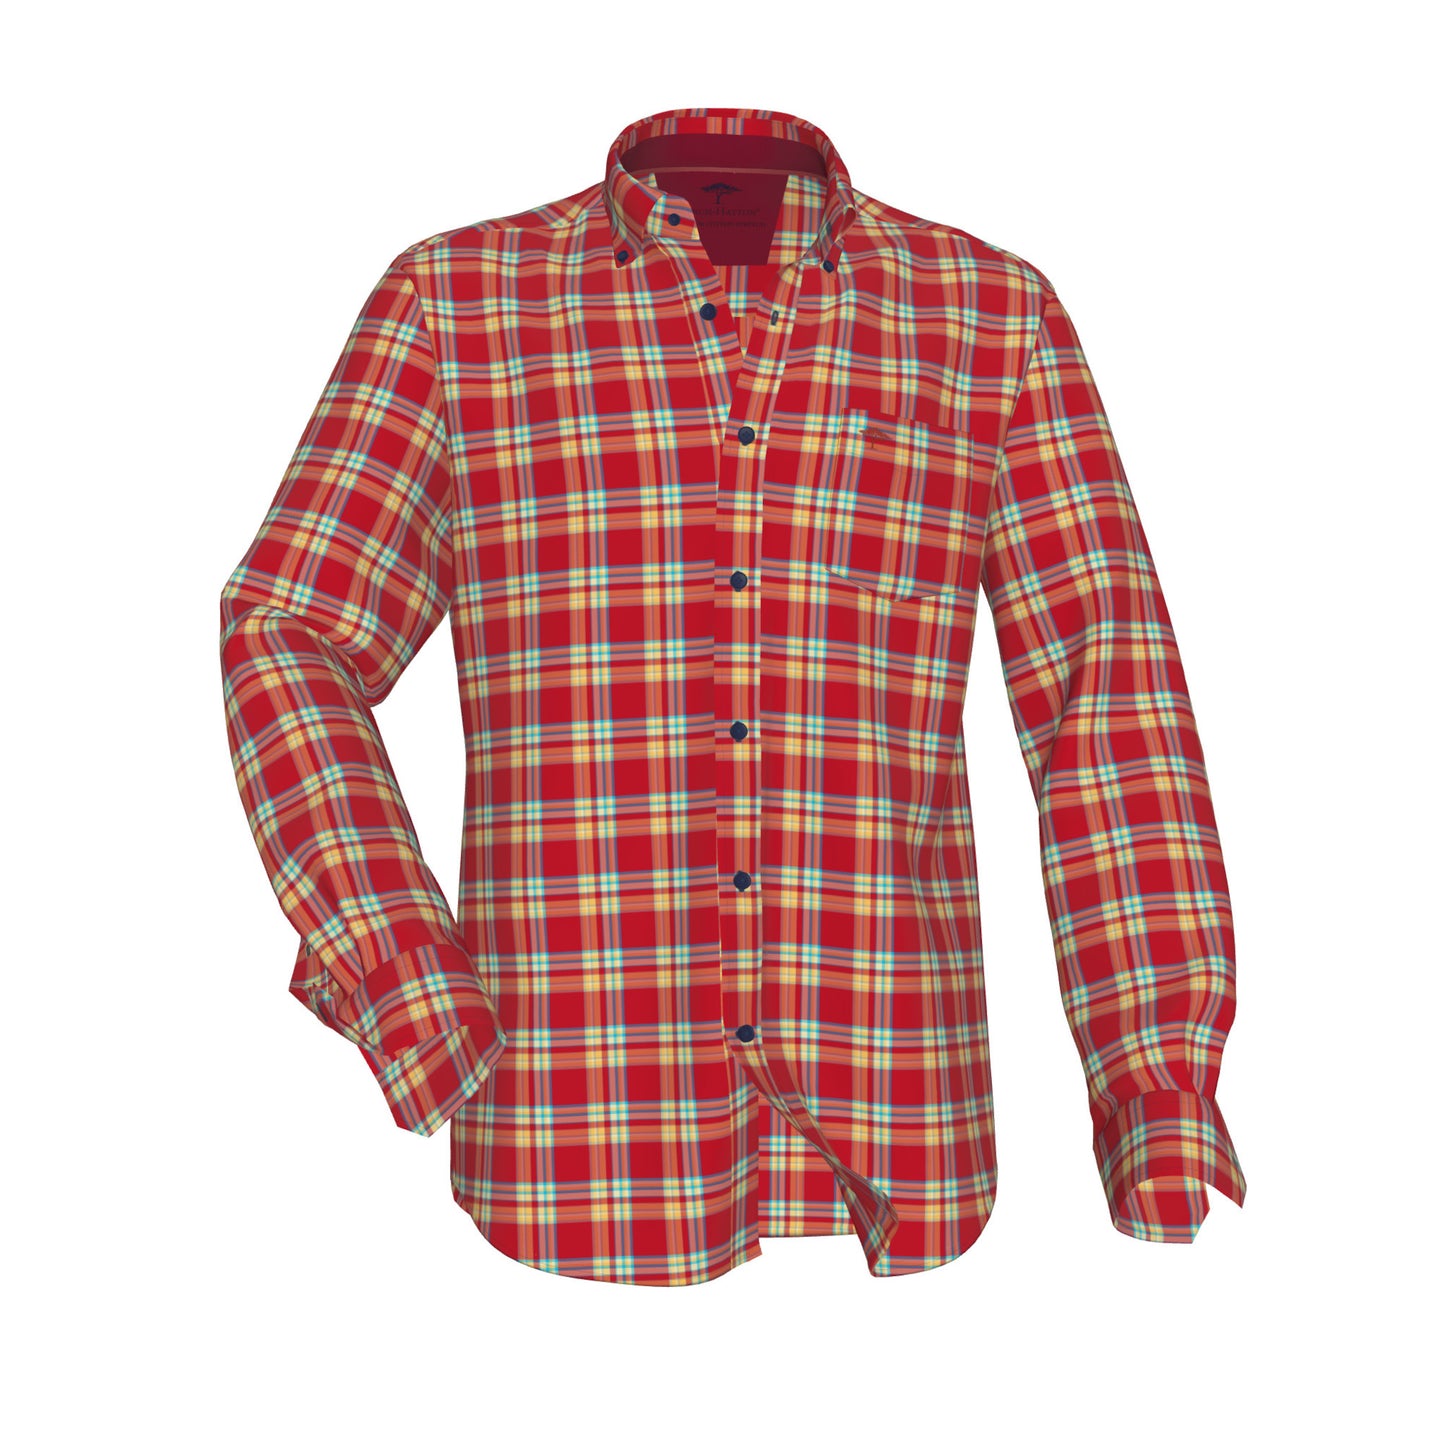 Fynch Hatton 1213 6020 6021 Red Check Flannel Check Casual Shirt